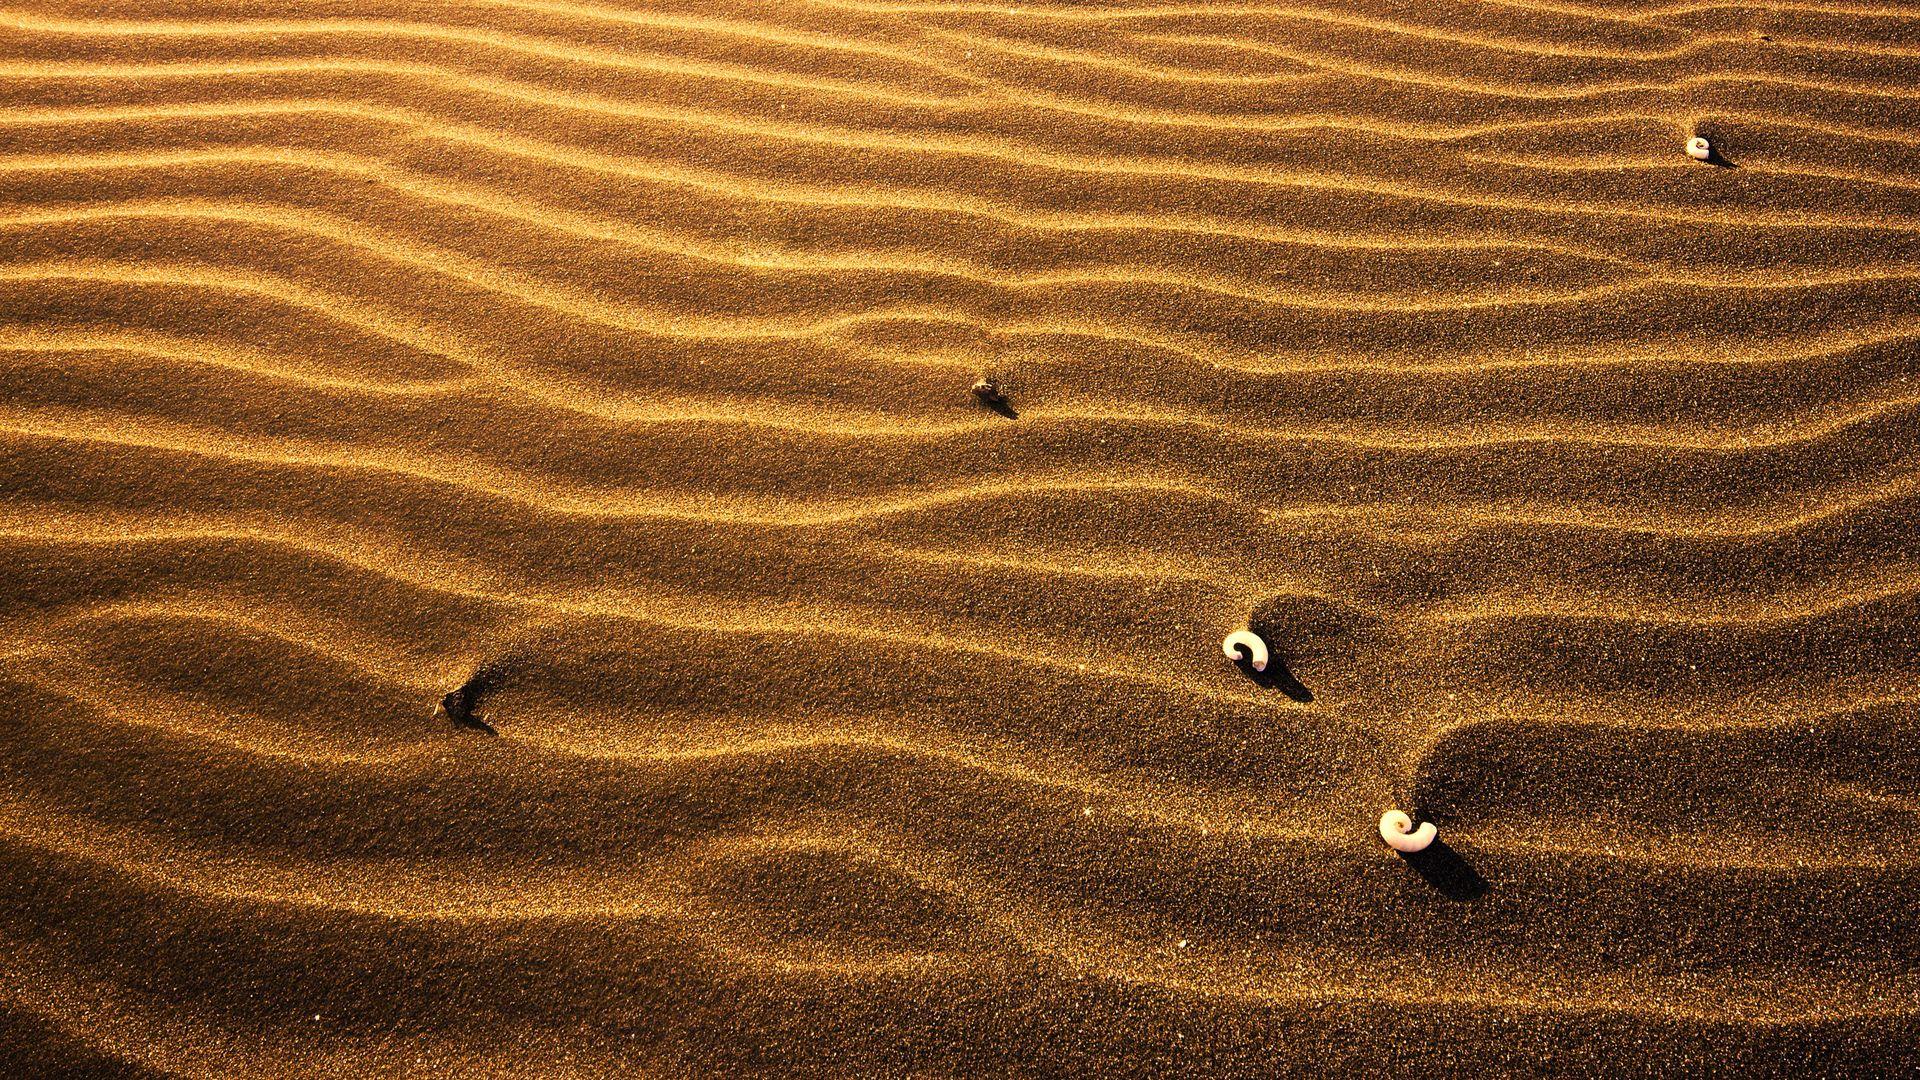 Daily Wallpaper: Sand. I Like To Waste My Time